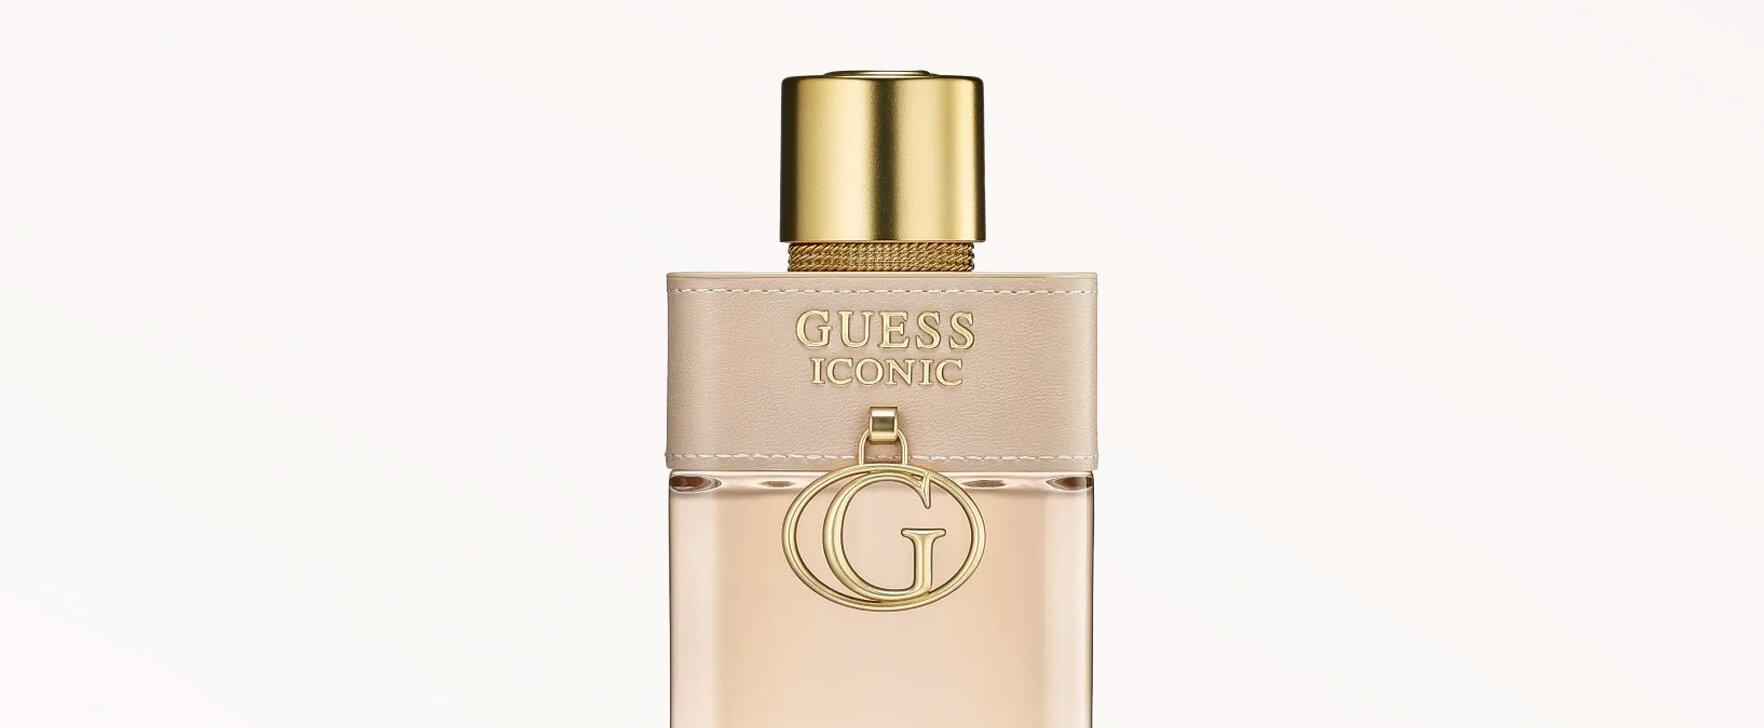 A Tribute to Sensuality and Glamor: The New Iconic Eau de Parfum From Guess